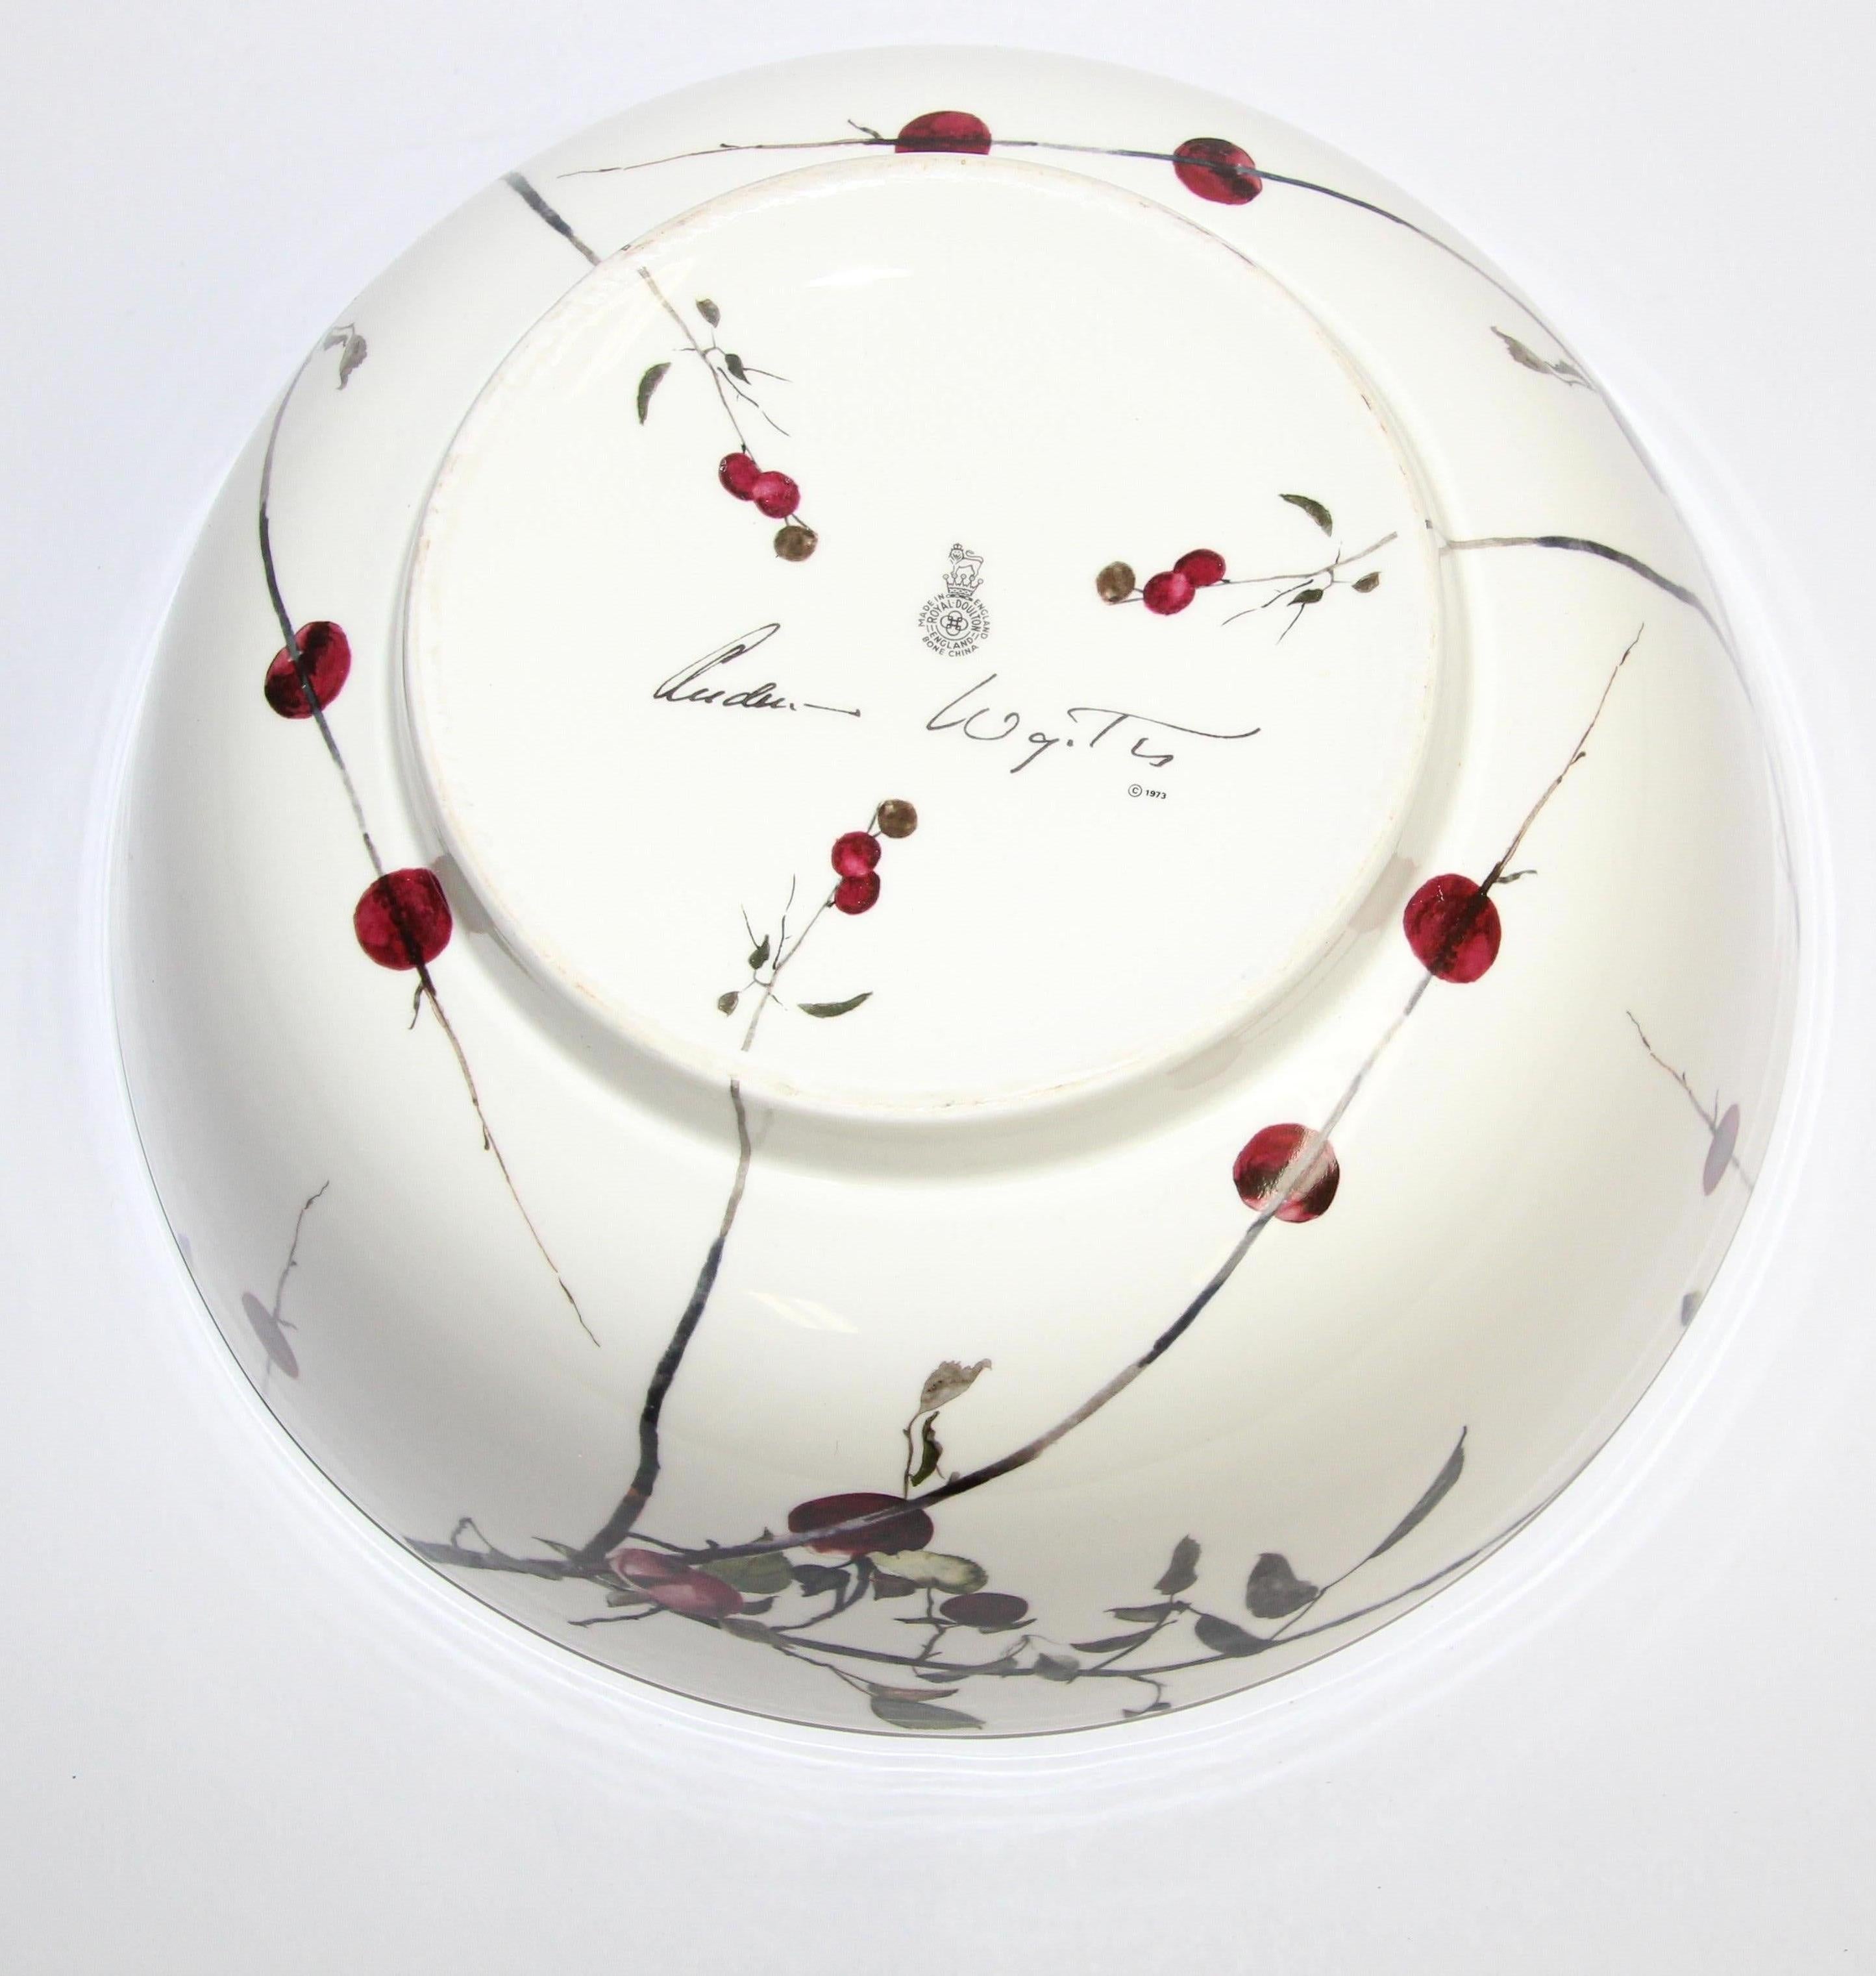 Victorian Royal Doulton Porcelain Bowl Designed by Andrew Wyeth England 1973 For Sale